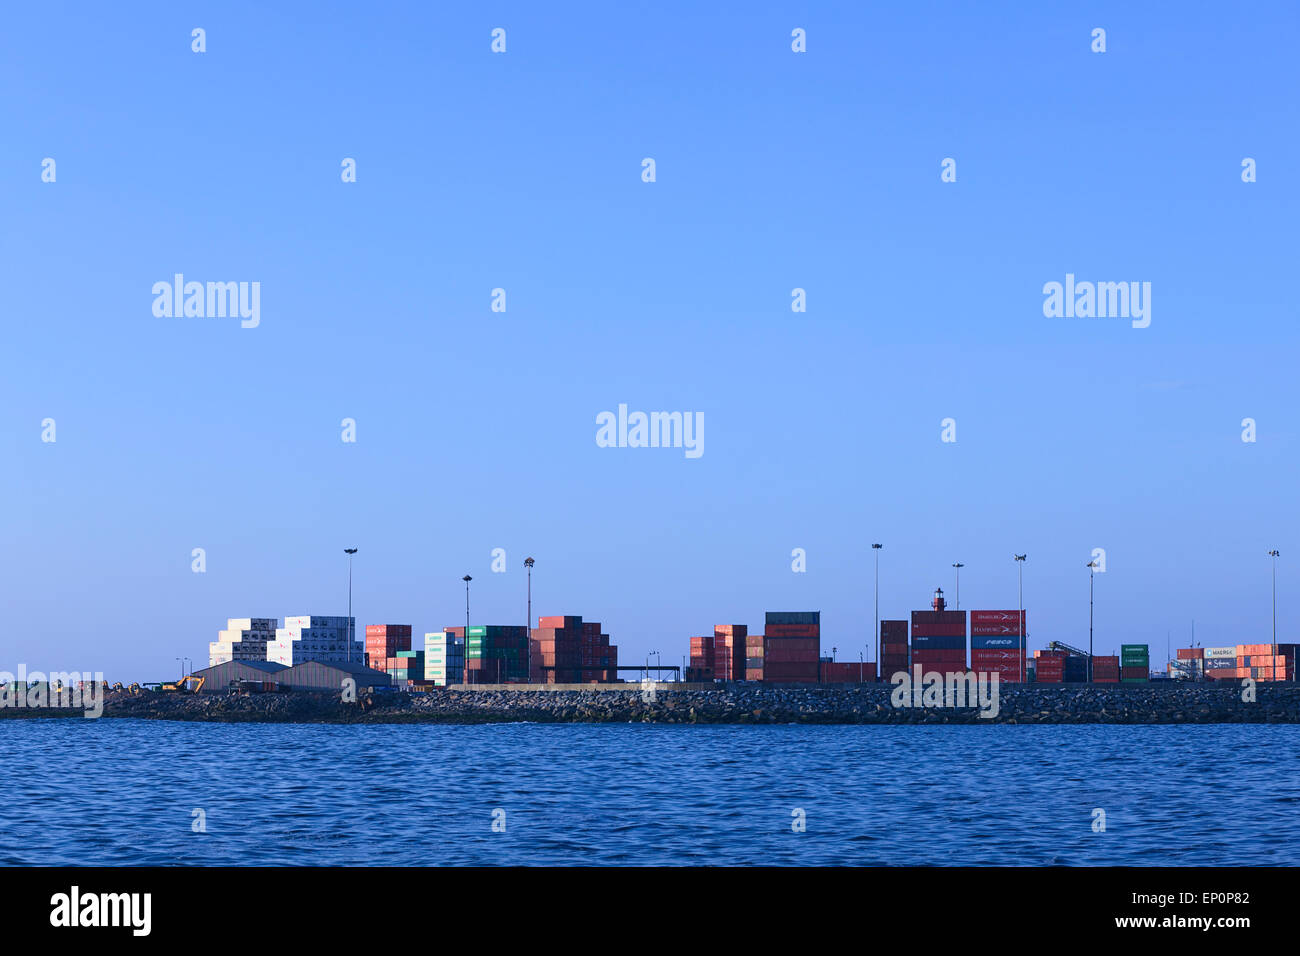 Many containers piled in the port in Iquique, Chile. Iquique is a free port city in Northern Chile. Stock Photo